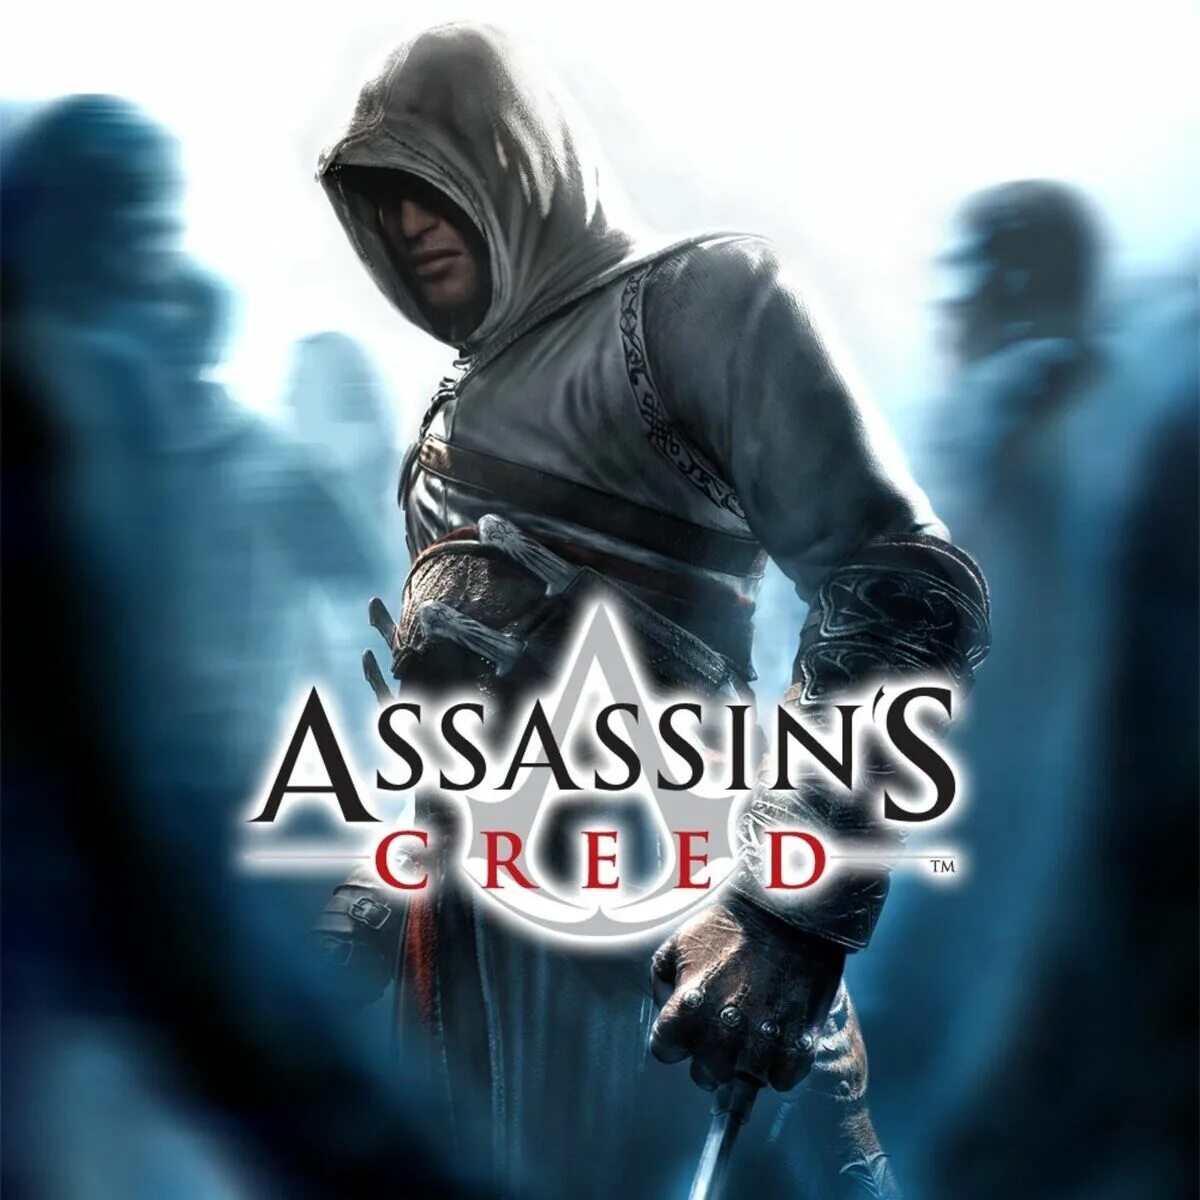 Creed soundtrack. Assassin s Creed. Assassin's Creed 1 обложка. Assassin's Creed 2007 обложка. Ассасин Крид 1 обложка.